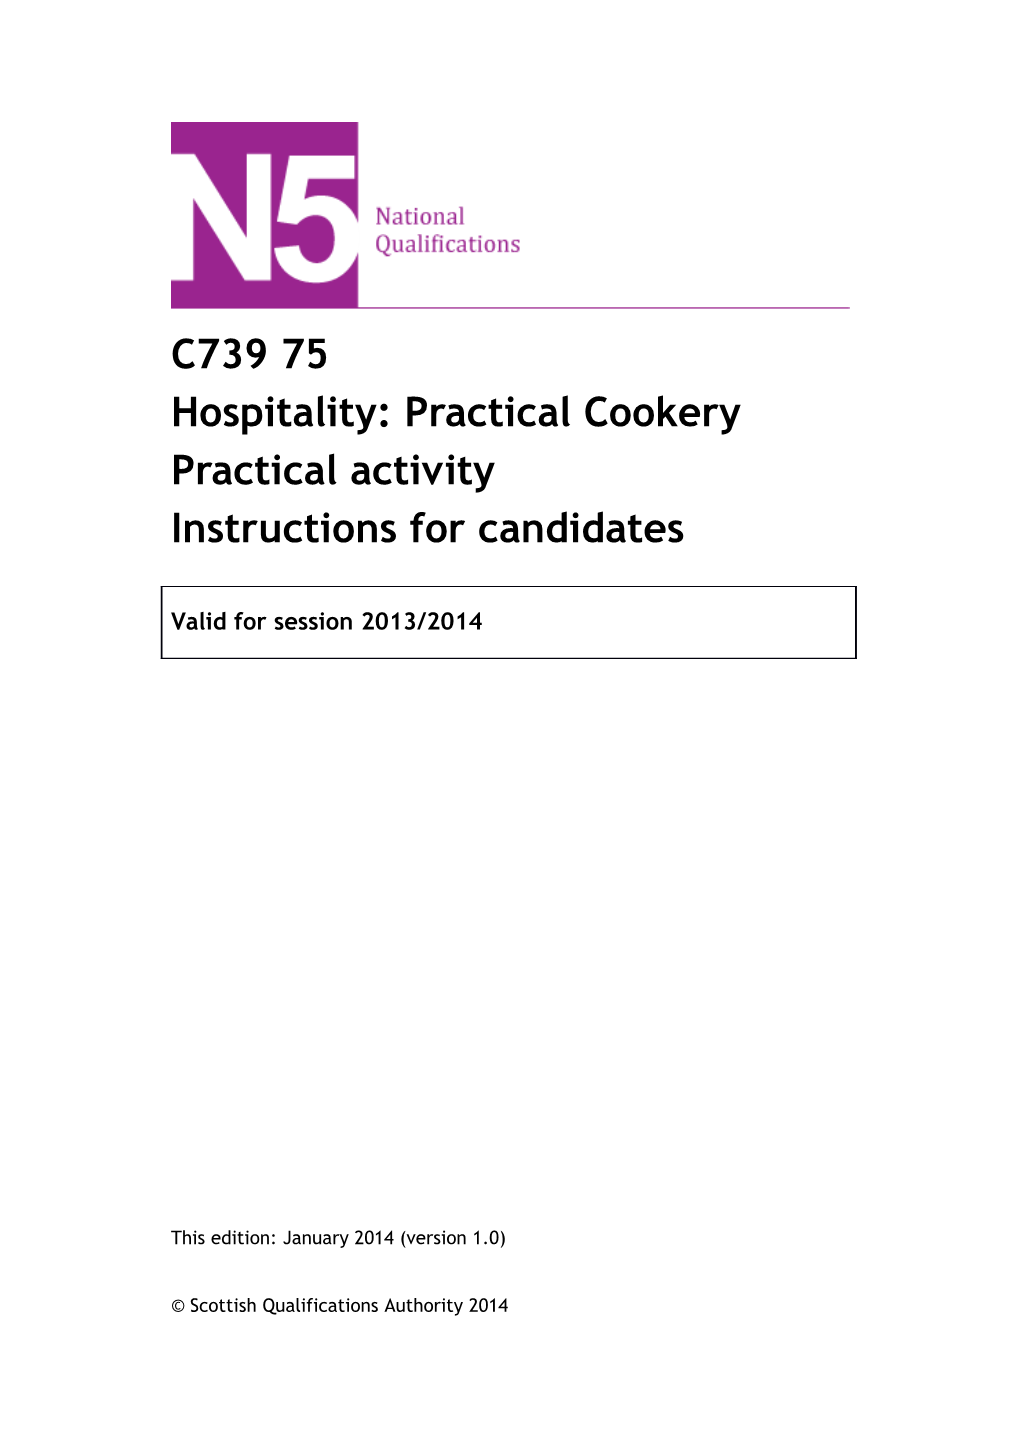 Hospitality: Practical Cookery s1